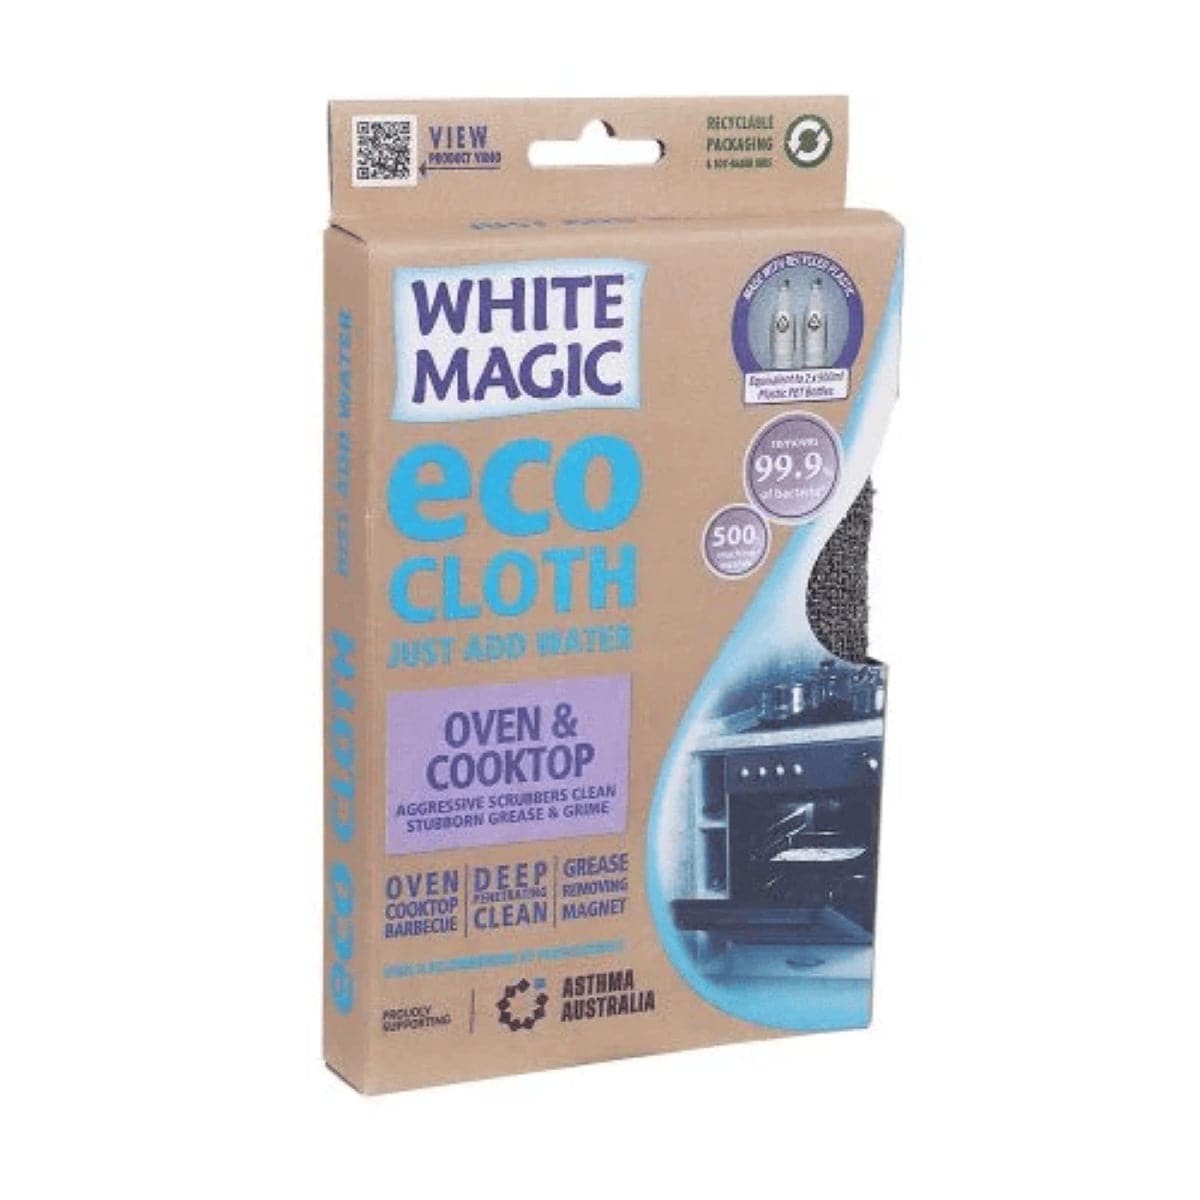 White Magic Eco Cloth Oven & Cooktop 1 Pack